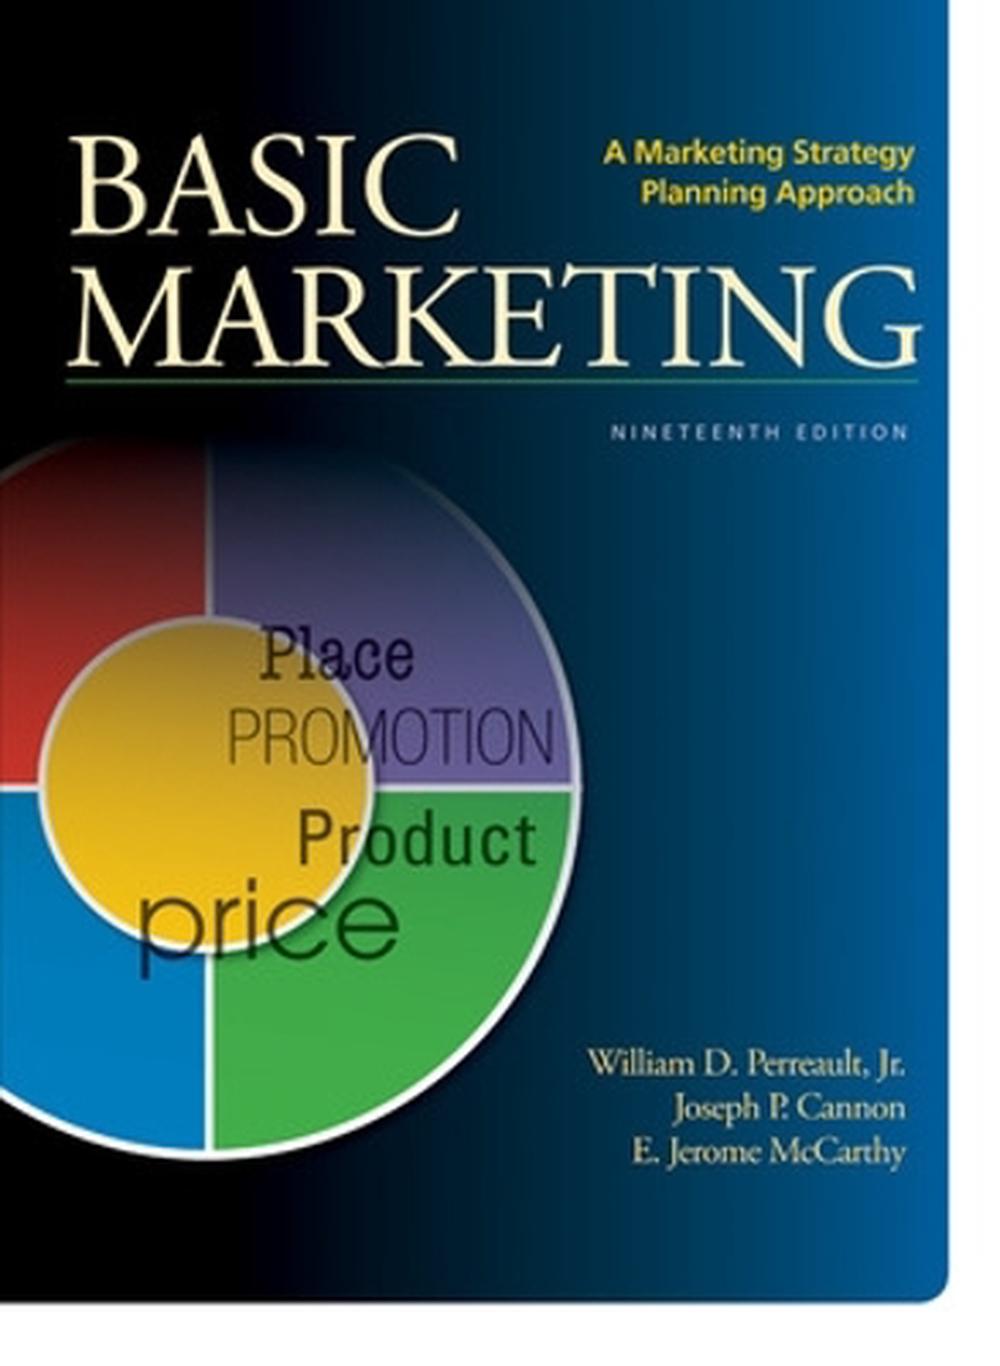 Basic Marketing A Marketing Strategy Planning Approach by Jr. William